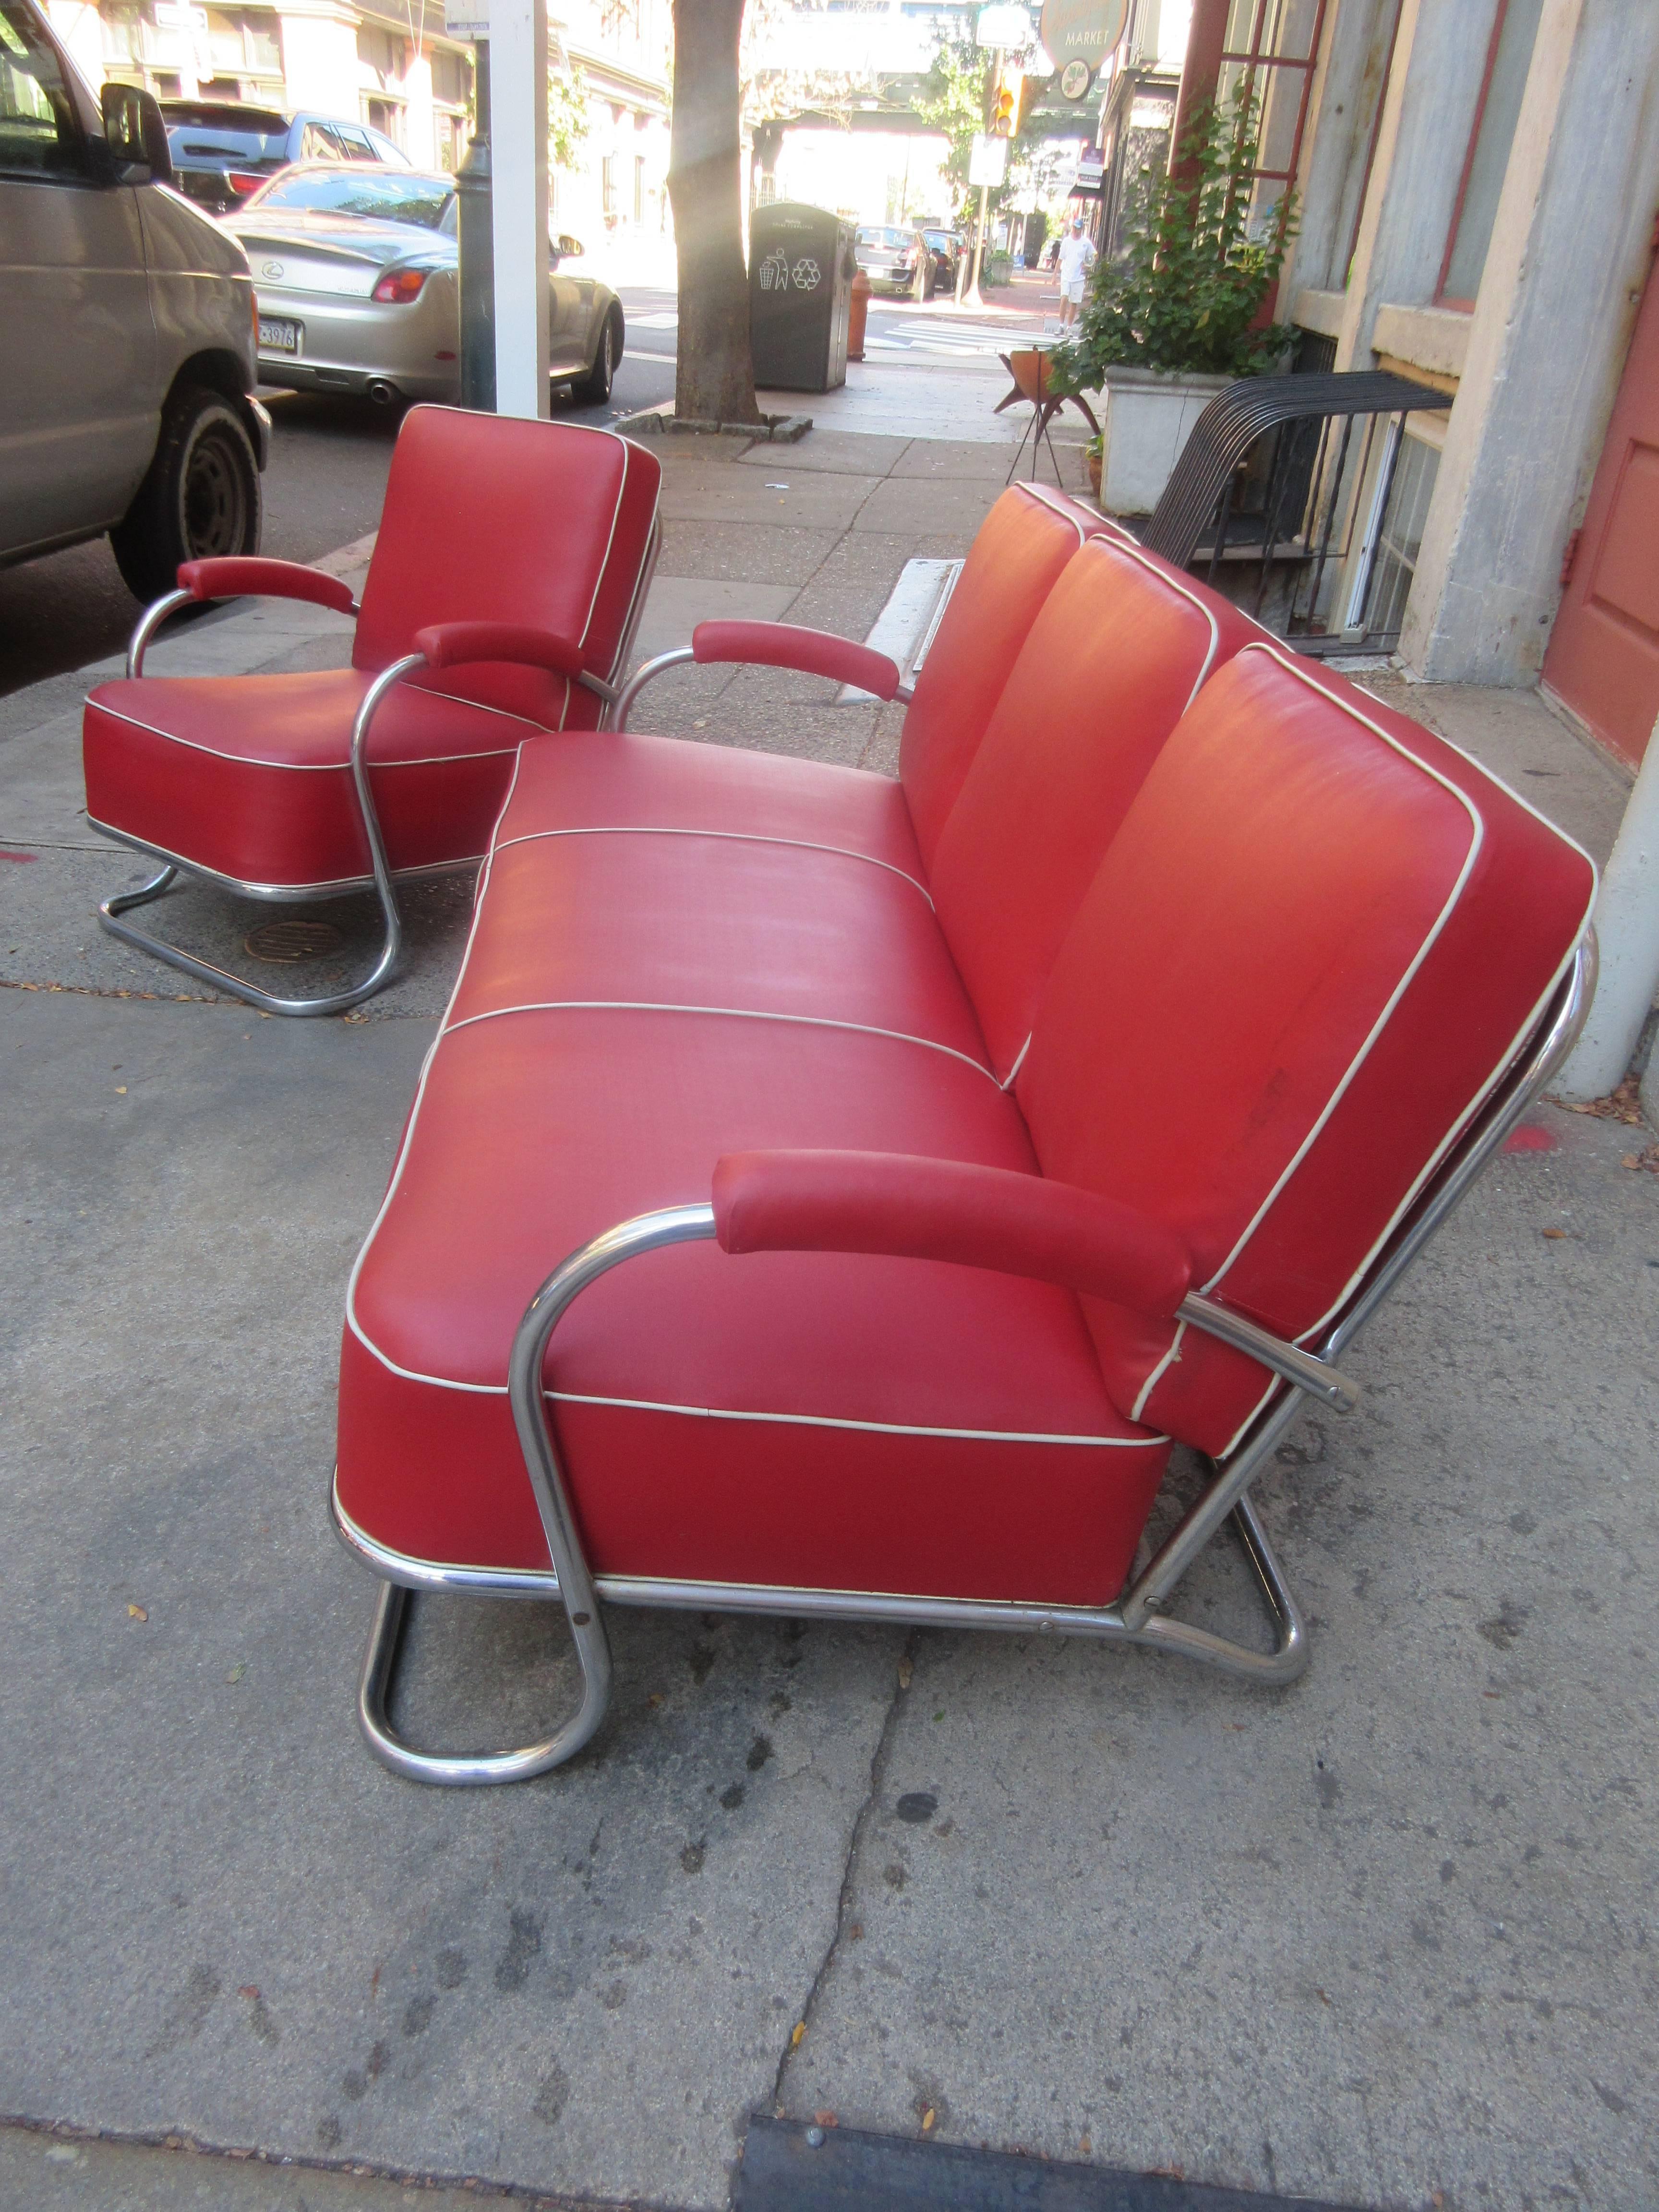 Nice set that was reupholstered maybe 15 years ago in red vinyl with white piping. Possibly manufactured by either Howell or Troy Sunshade in the late 1930s Chrome shows a little wear on front bar but overall presents very well! Nice thick fitted